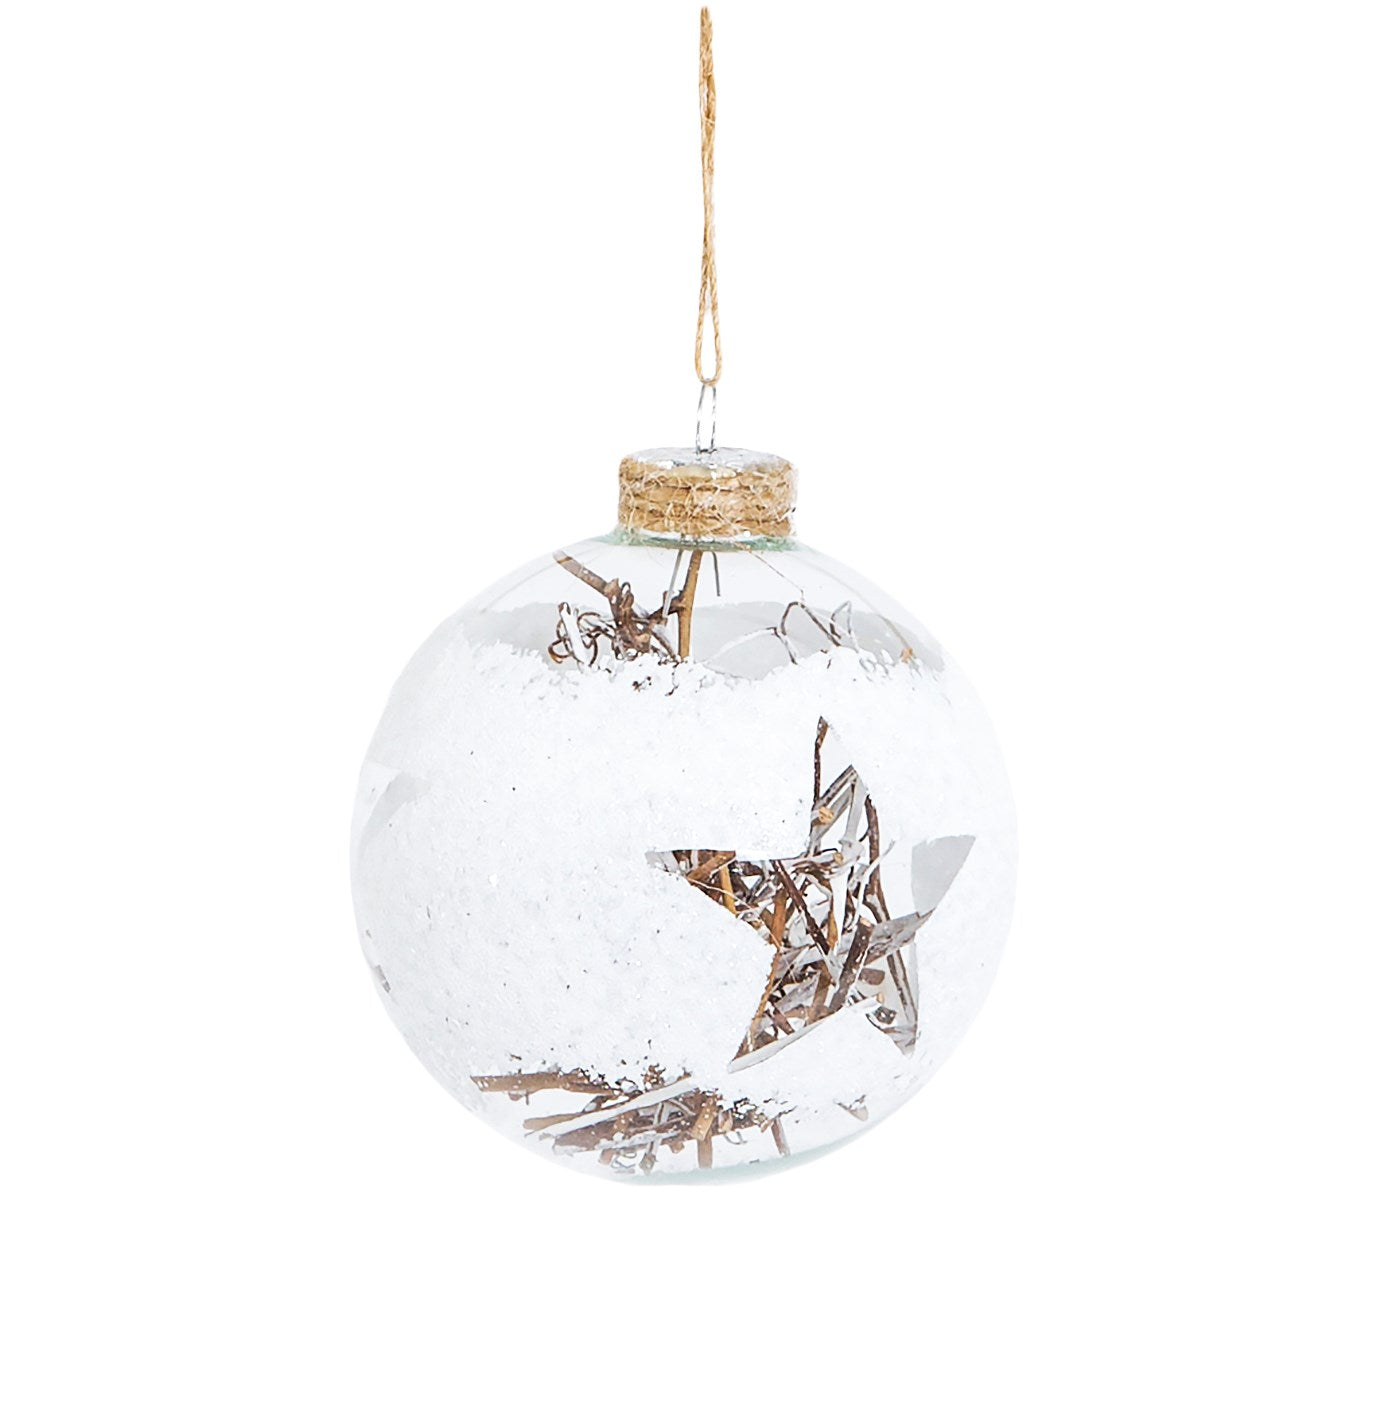 Lovely cut out star in a glass bauble filled with pieces of wood and hung with rustic string.